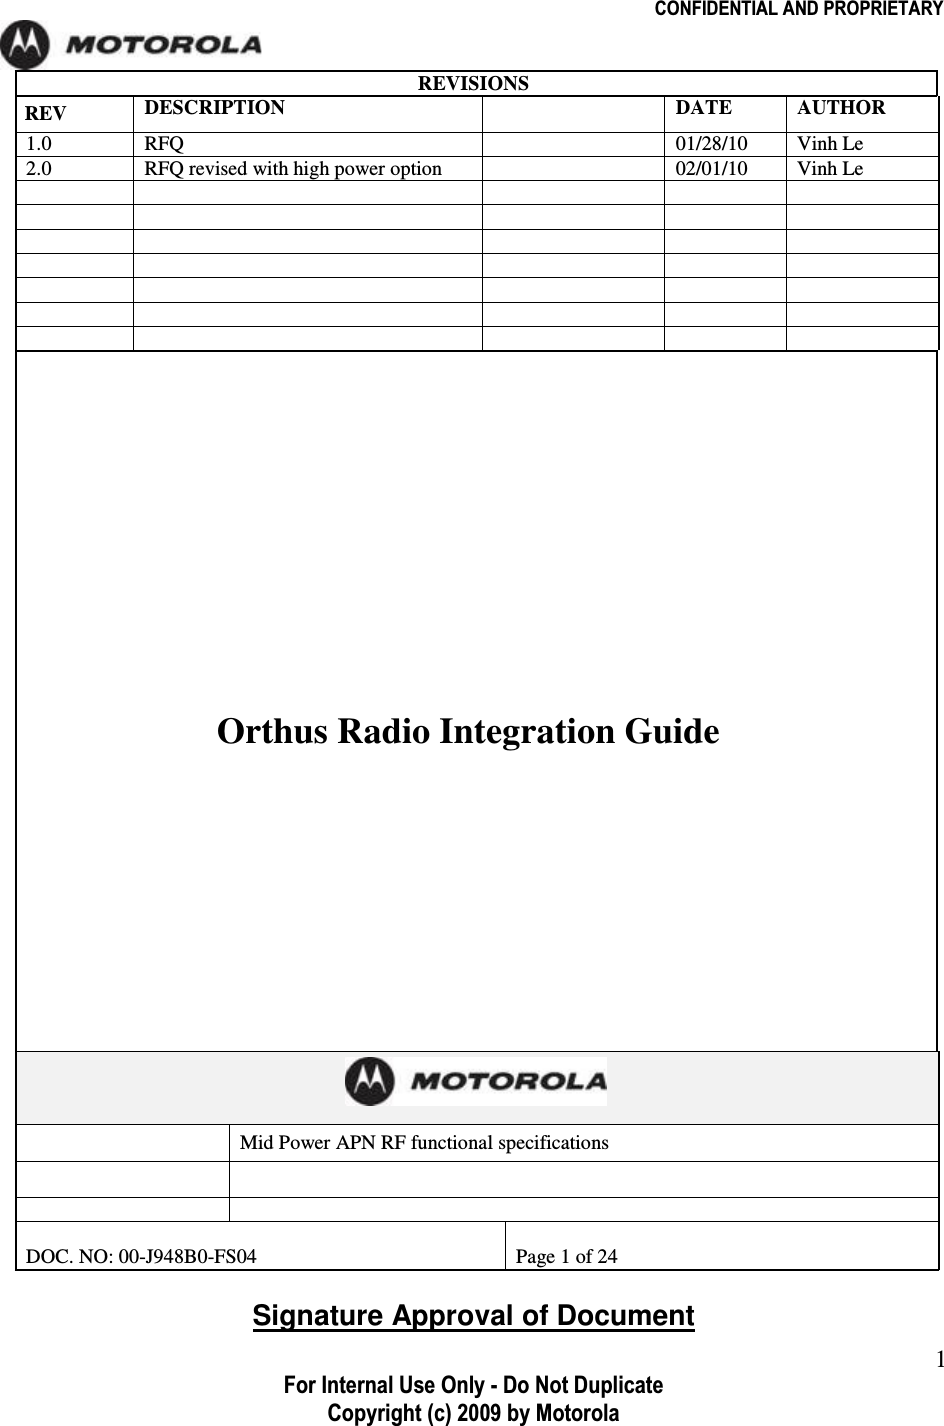                                                              CONFIDENTIAL AND PROPRIETARY  For Internal Use Only - Do Not Duplicate Copyright (c) 2009 by Motorola  1REVISIONS REV  DESCRIPTION  DATE AUTHOR 1.0 RFQ    01/28/10 Vinh Le 2.0  RFQ revised with high power option    02/01/10  Vinh Le                                                       Orthus Radio functional specification   Mid Power APN RF functional specifications     DOC. NO: 00-J948B0-FS04  Page 1 of 24               Signature Approval of DocumentOrthus Radio Integration Guide